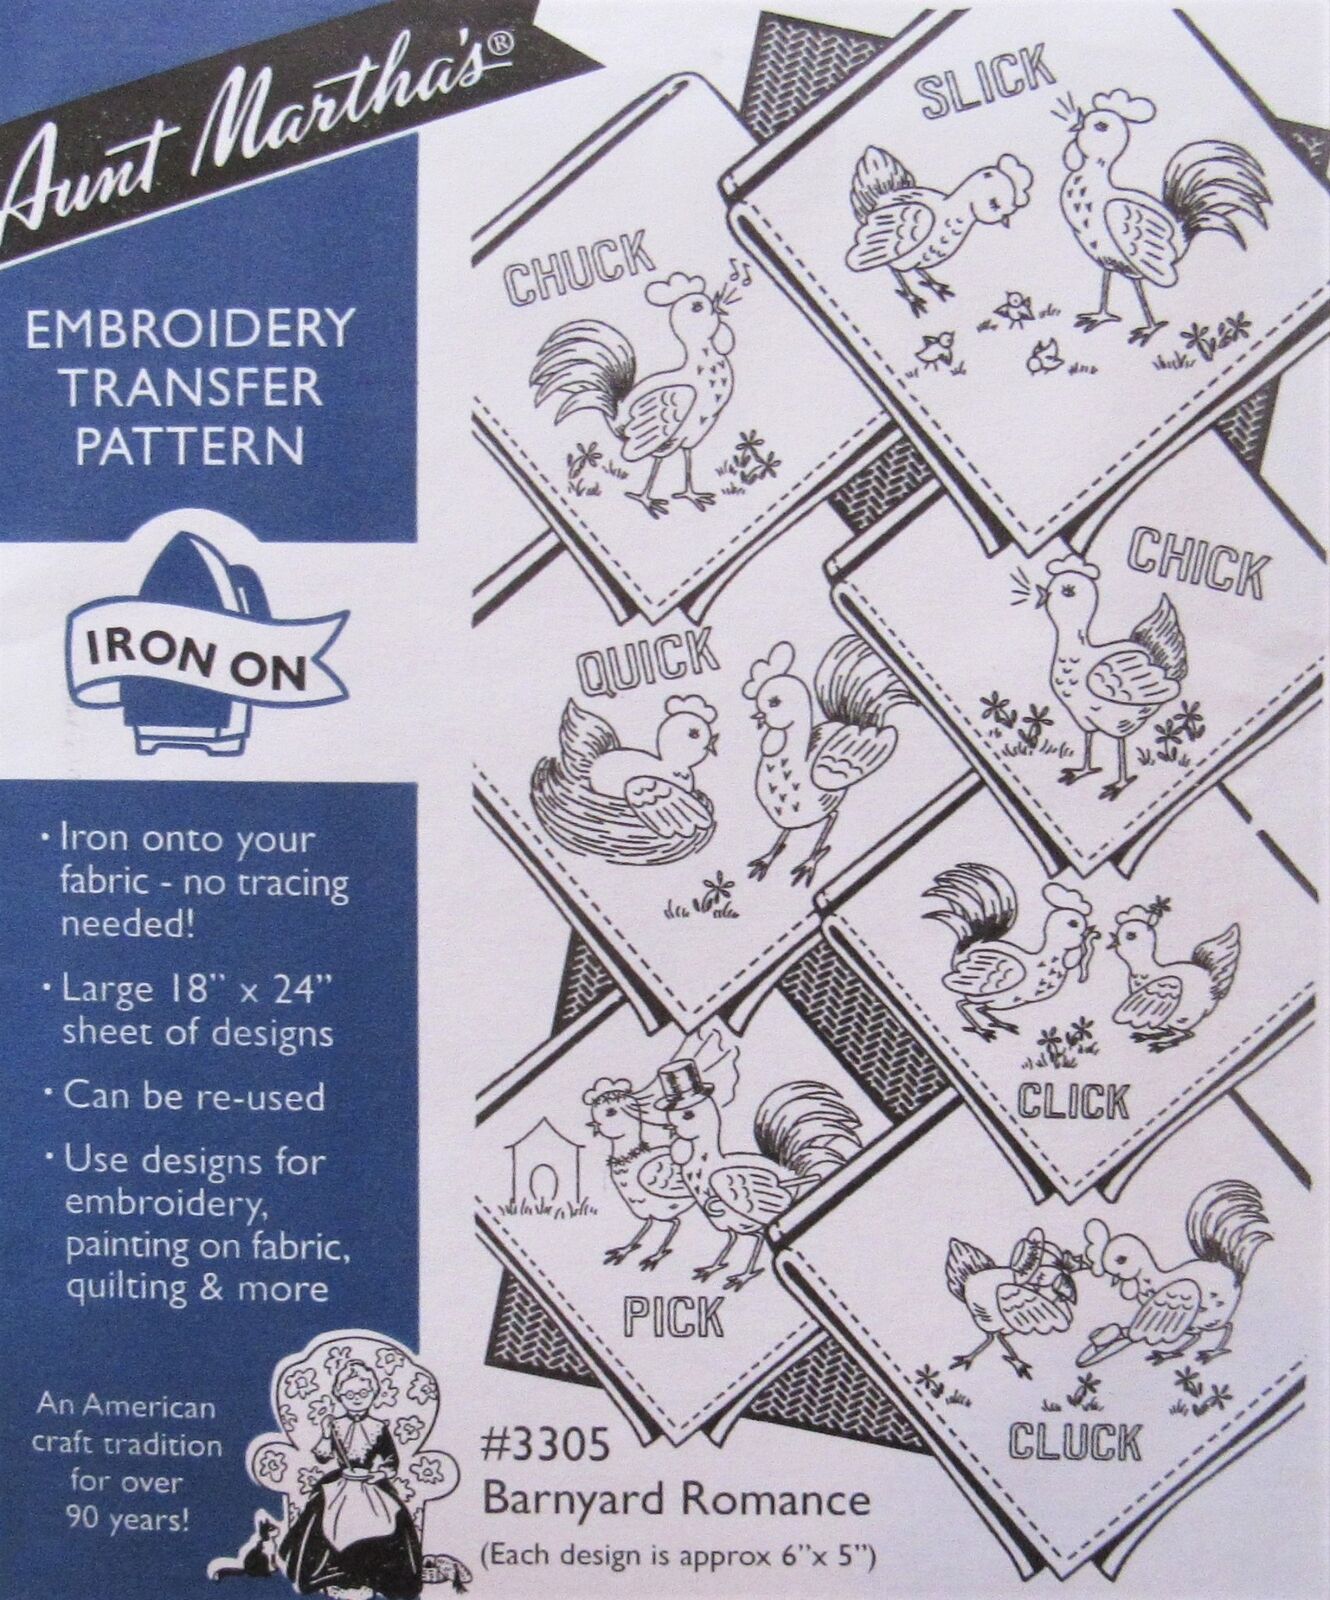 Aunt Marthas 3305 Barnyard Romance Embroidery Transfer Pattern Chicken Rooster